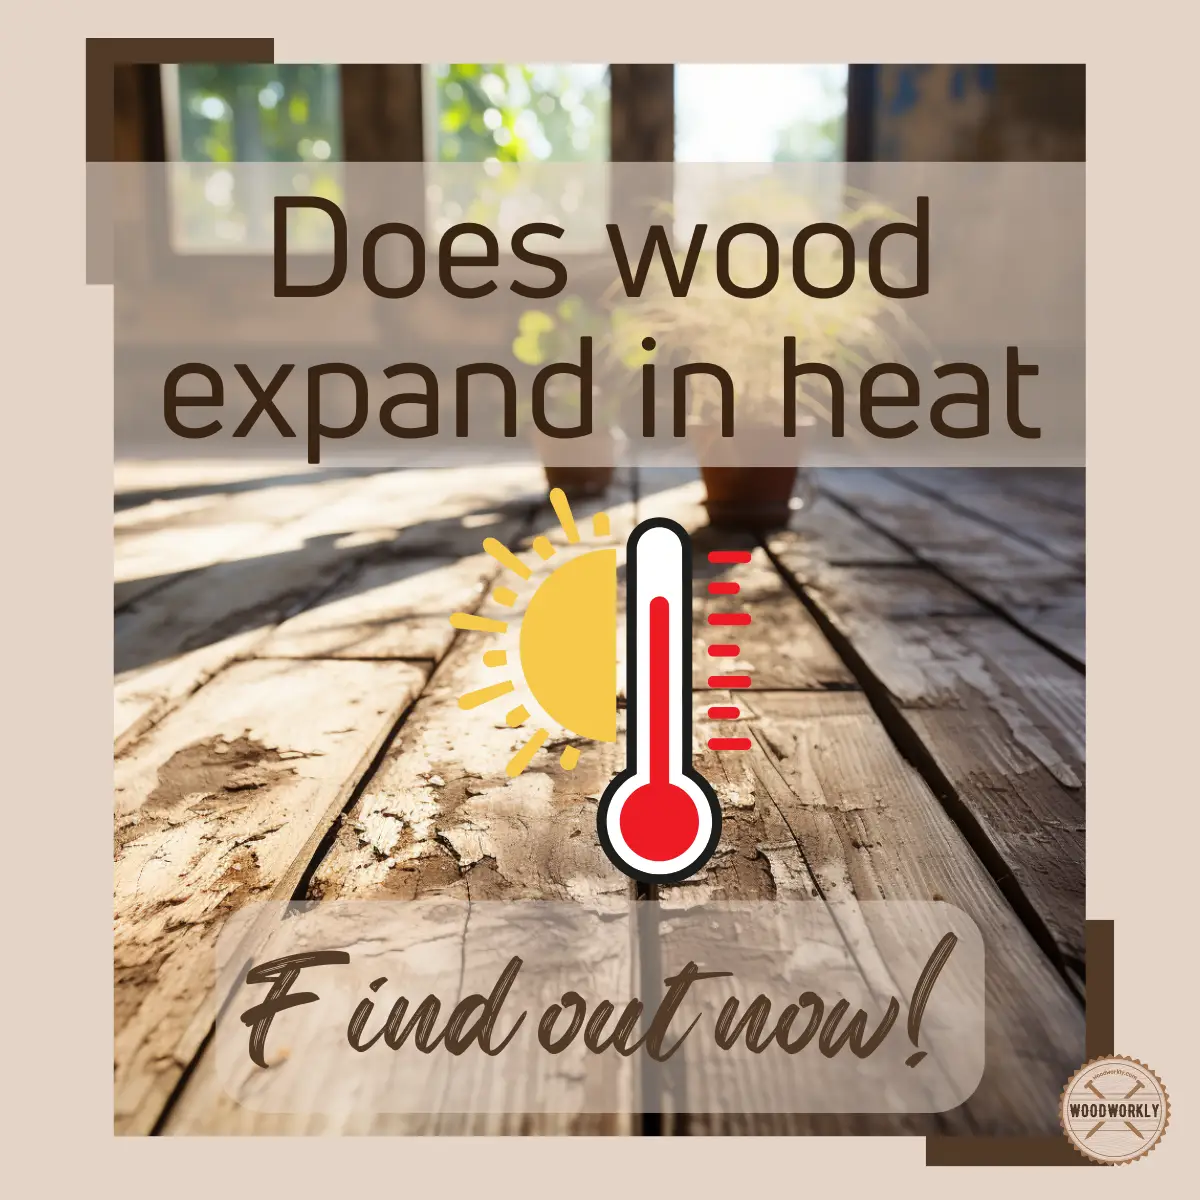 Does wood expand in heat